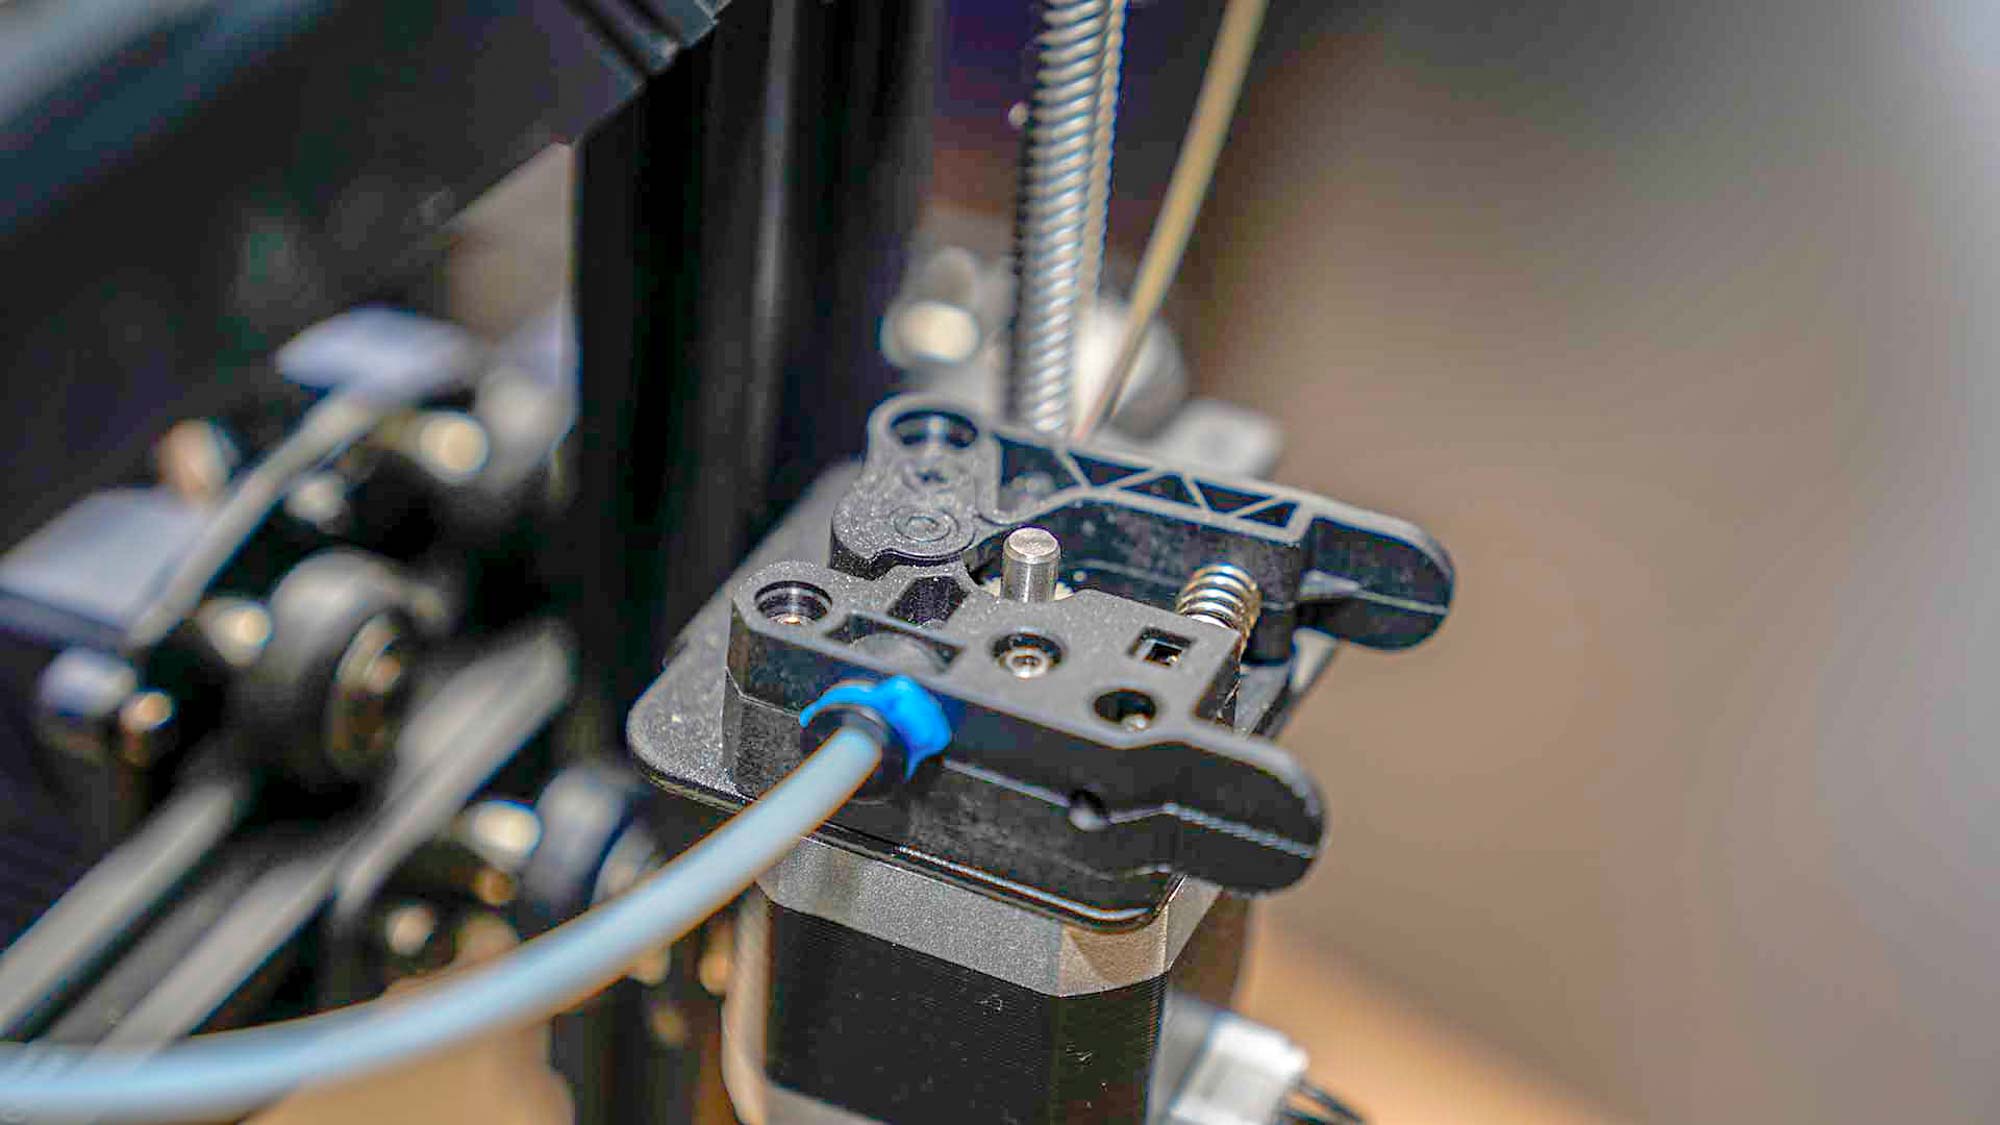 A close up shot of the AnyCubic Kobra's extruder